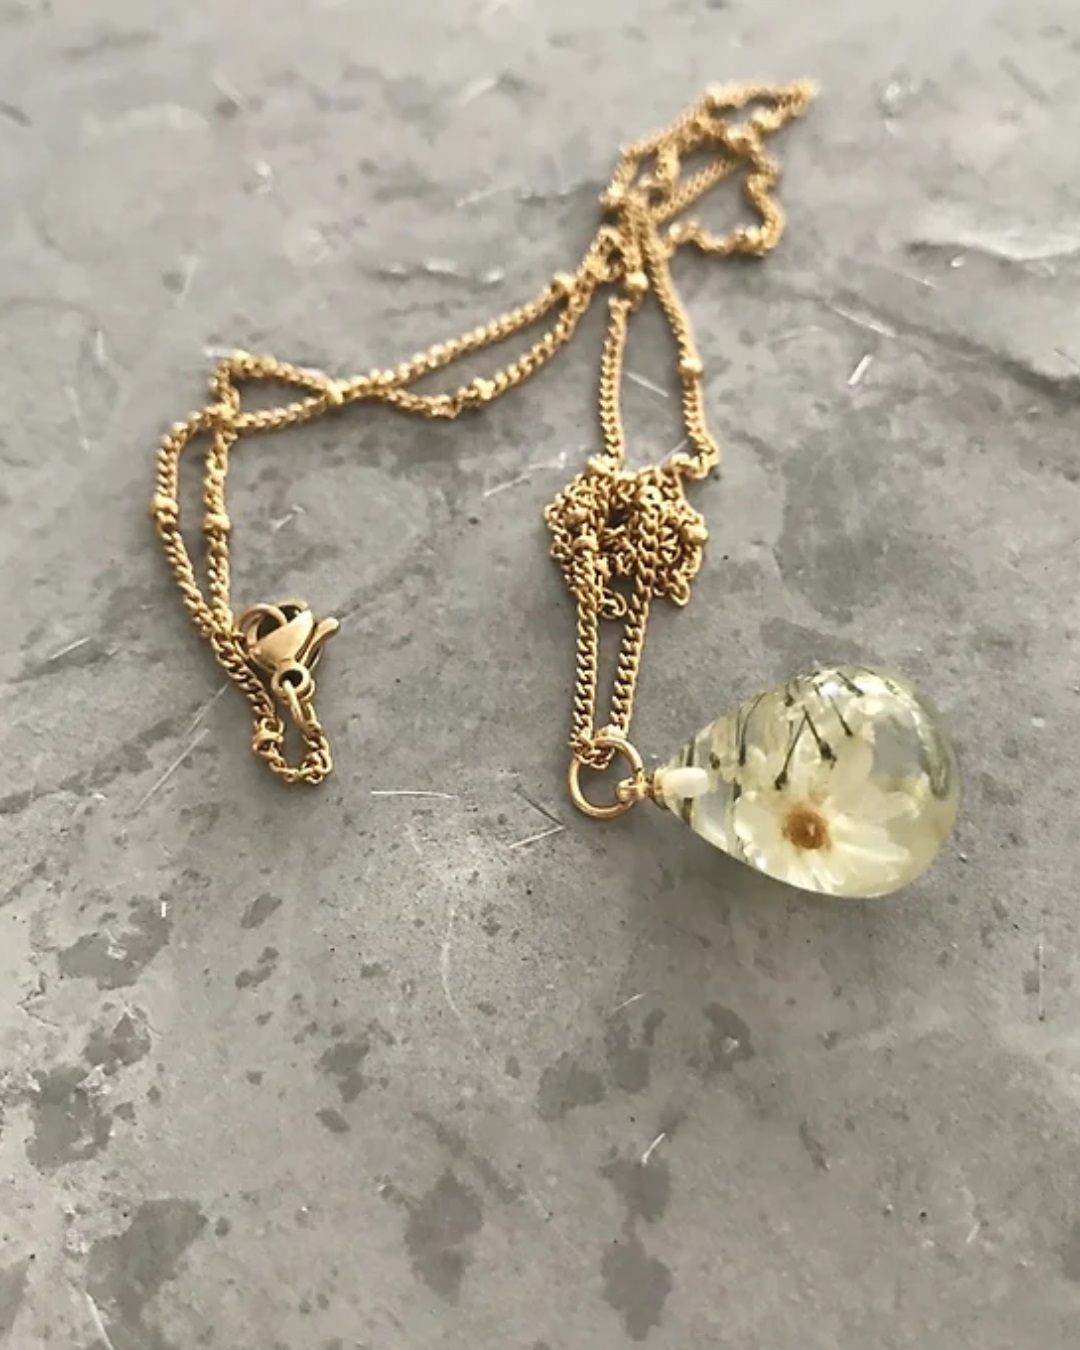 Gold chain necklace with flower in droplet